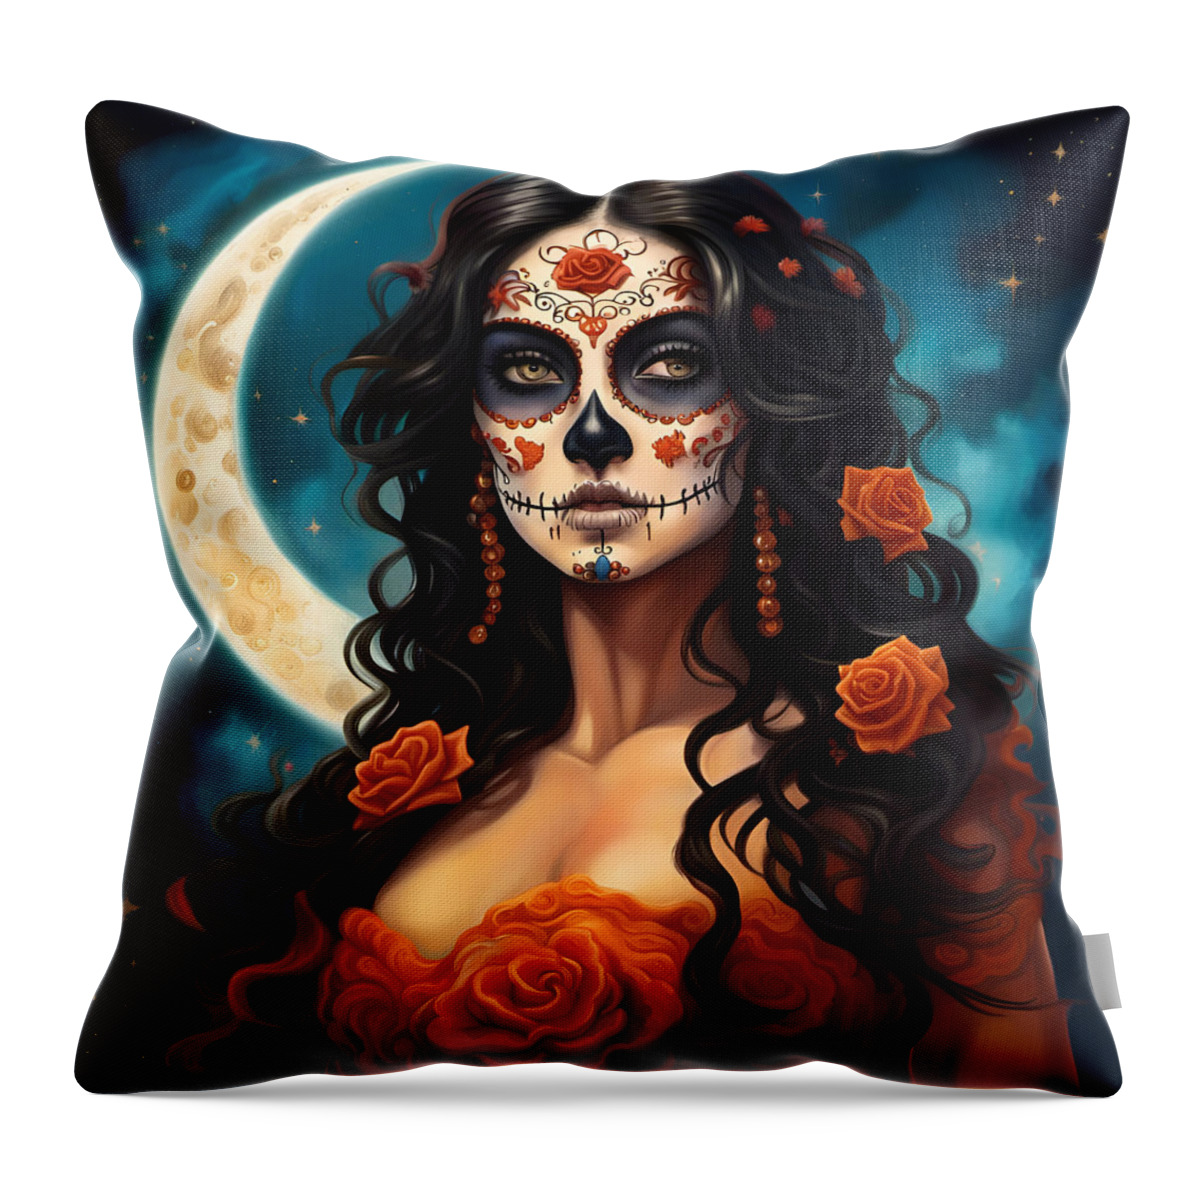 Beautiful Throw Pillow featuring the digital art Muerta Beauty Of The Night by Jason Denis